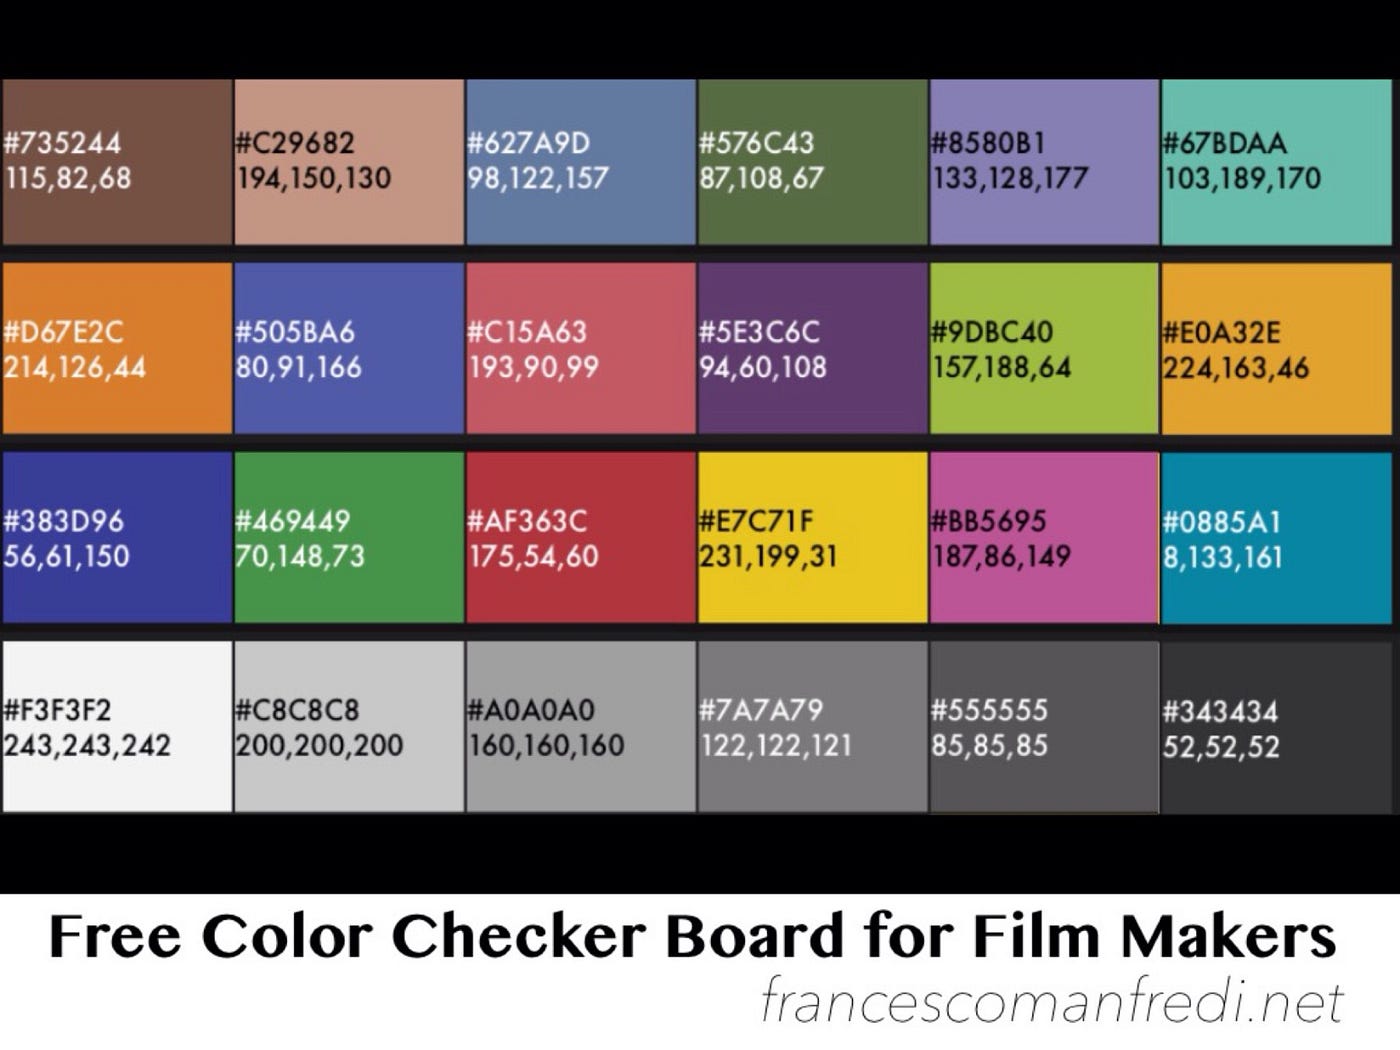 Getting the colors right with a color checker